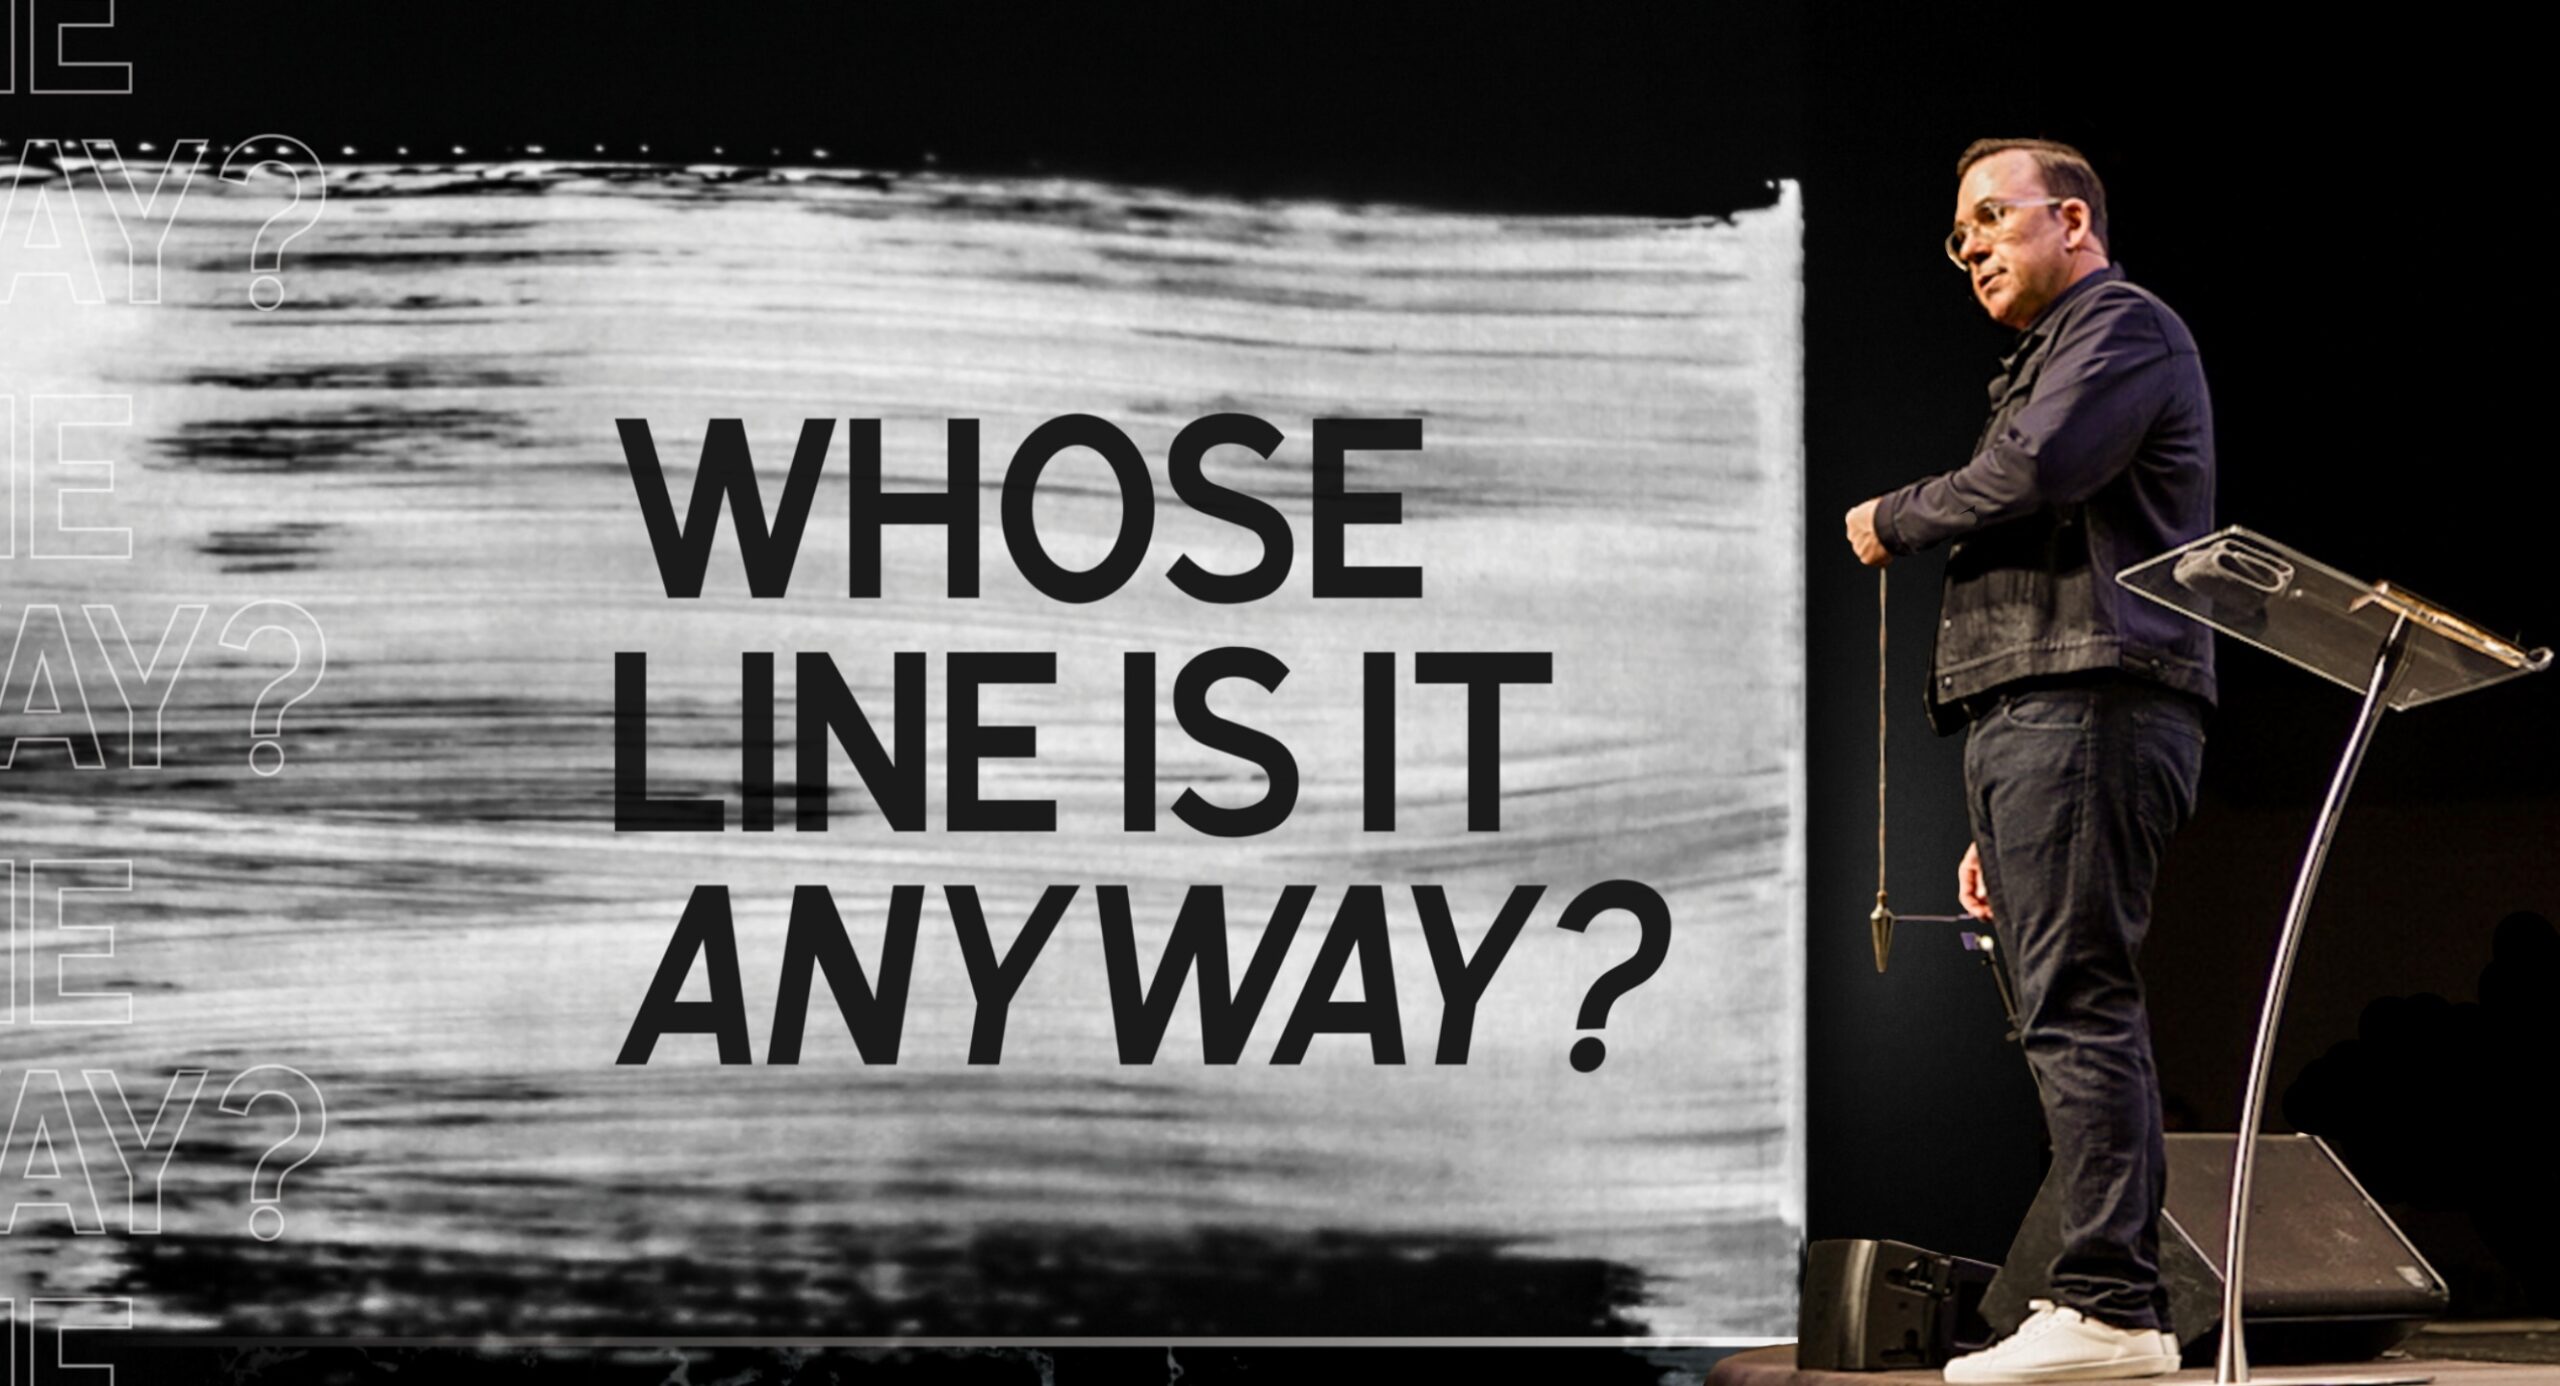 Who’s Line is it Anyway? | Apostle Jim Raley